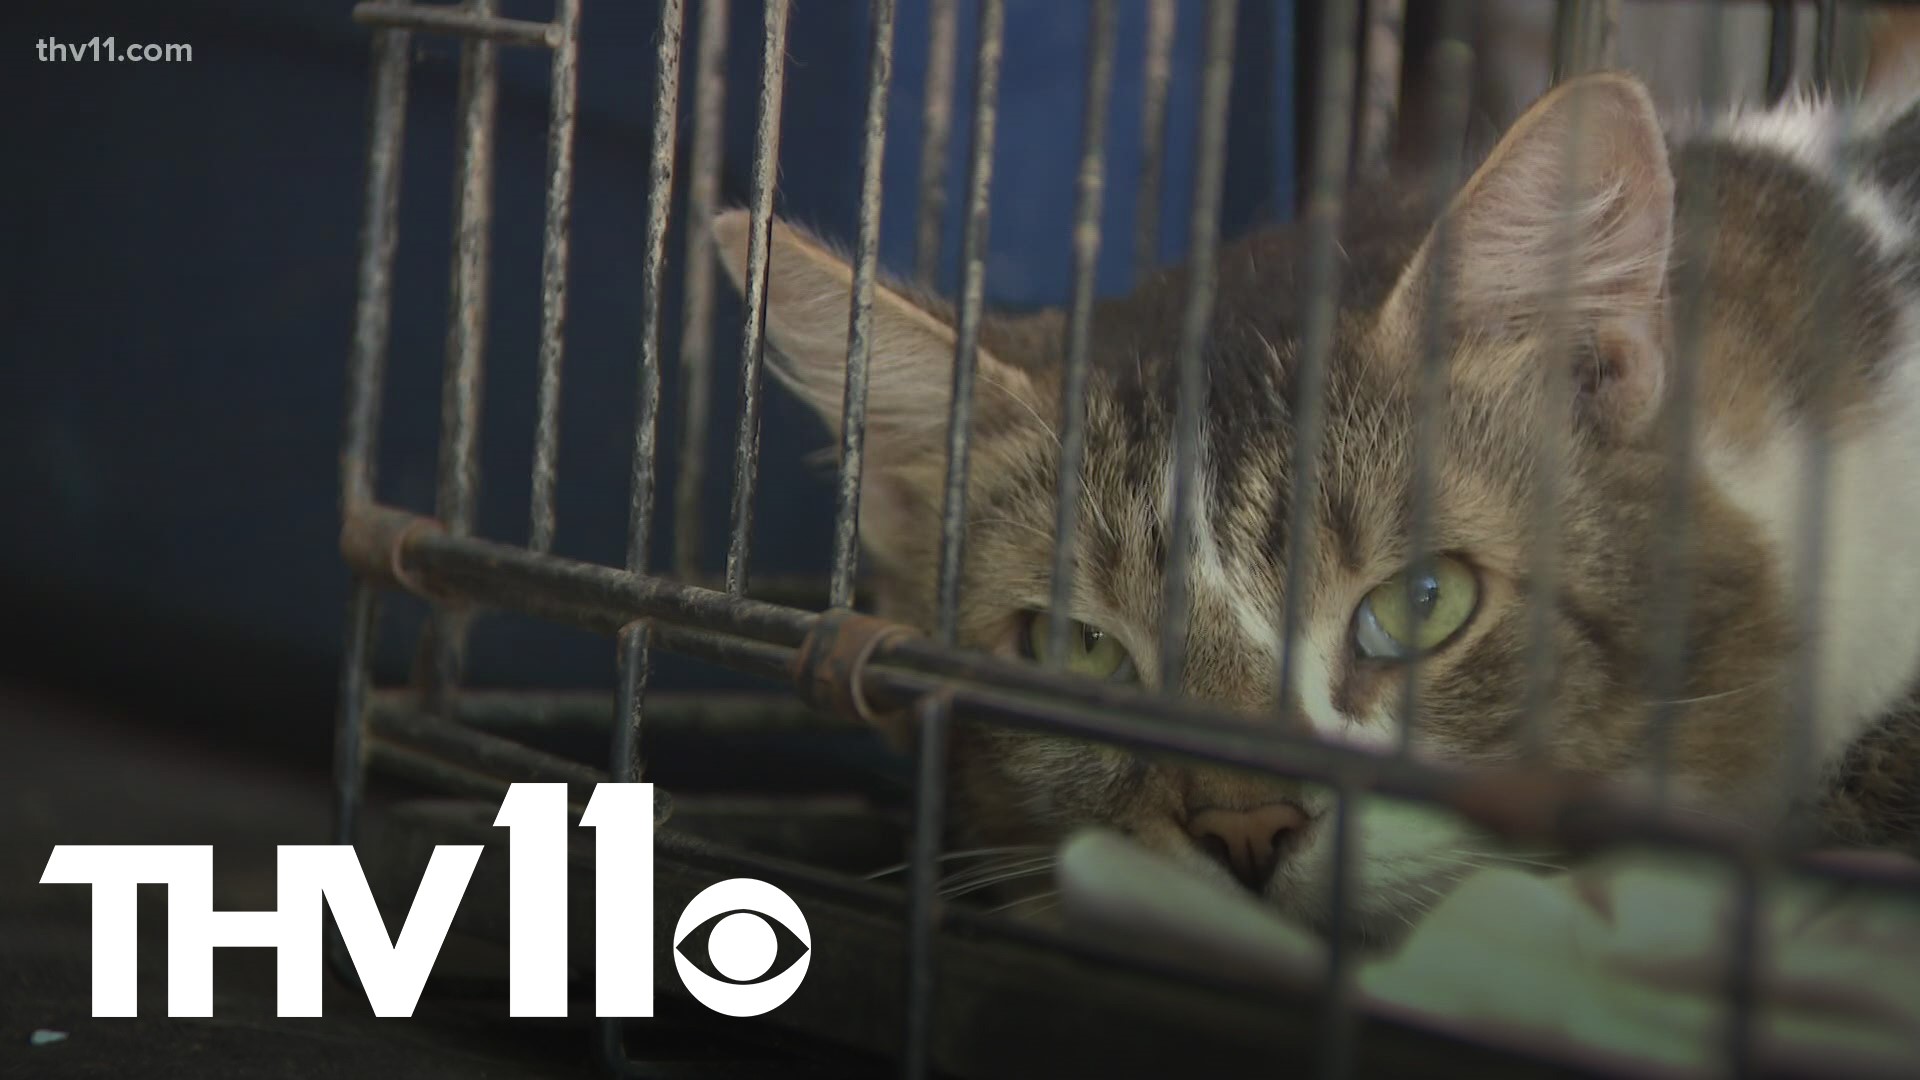 More than one hundred animals rescued in Faulkner County 